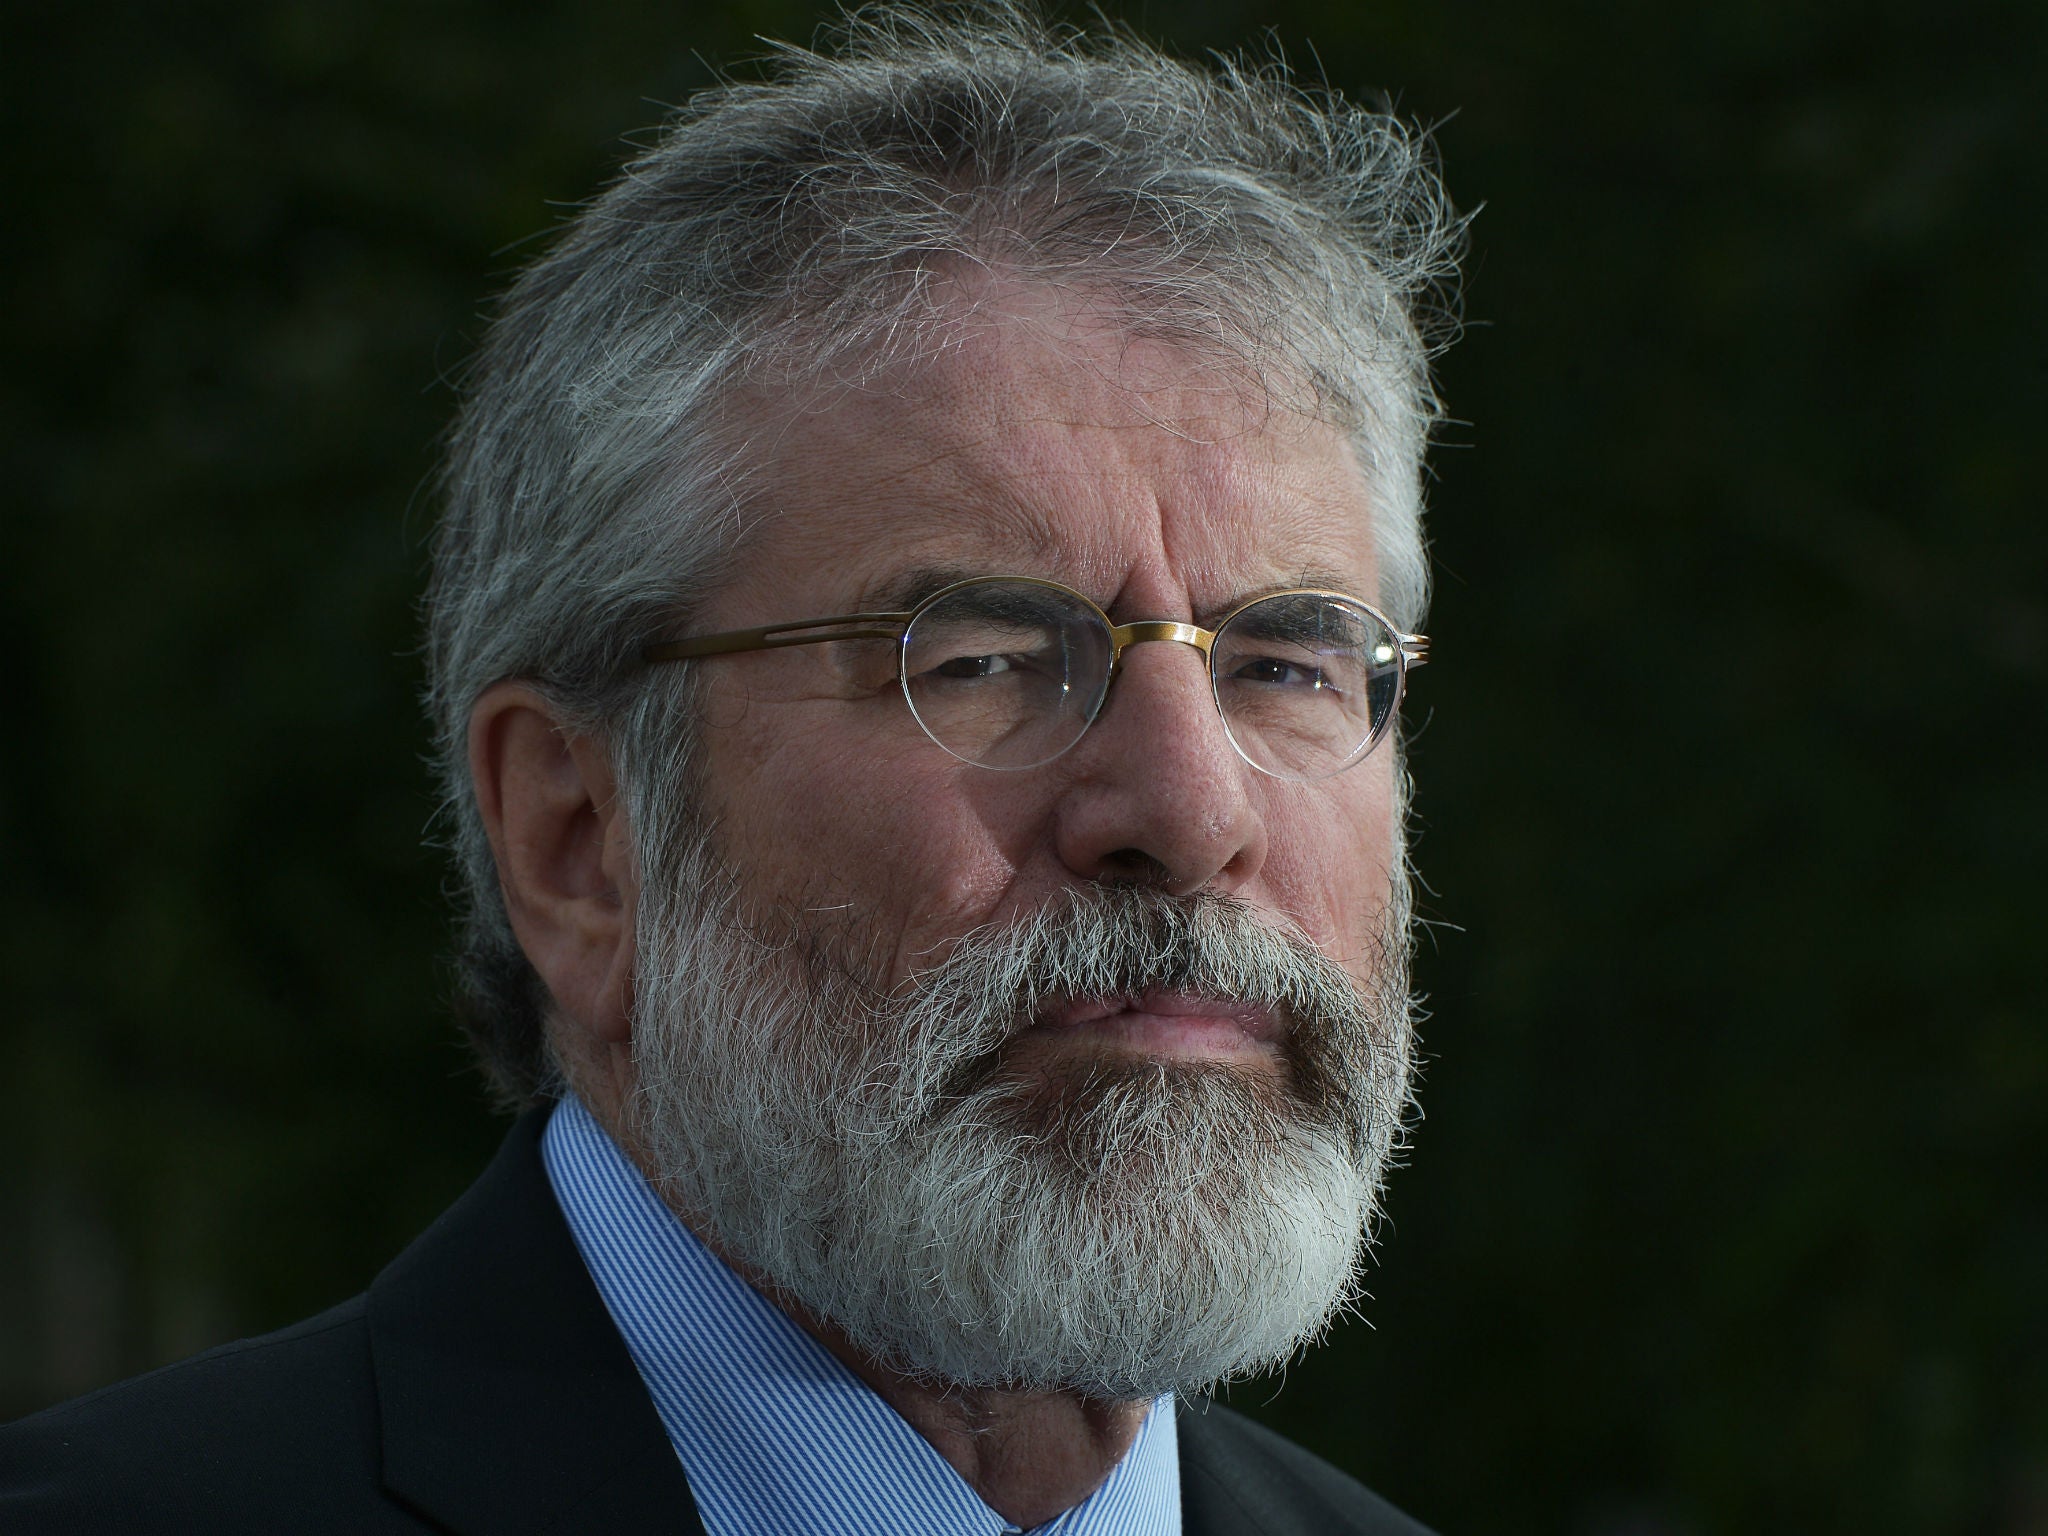 Gerry Adams' comments signal split with Martin McGuinness amid Sinn Fein ... - The Independent